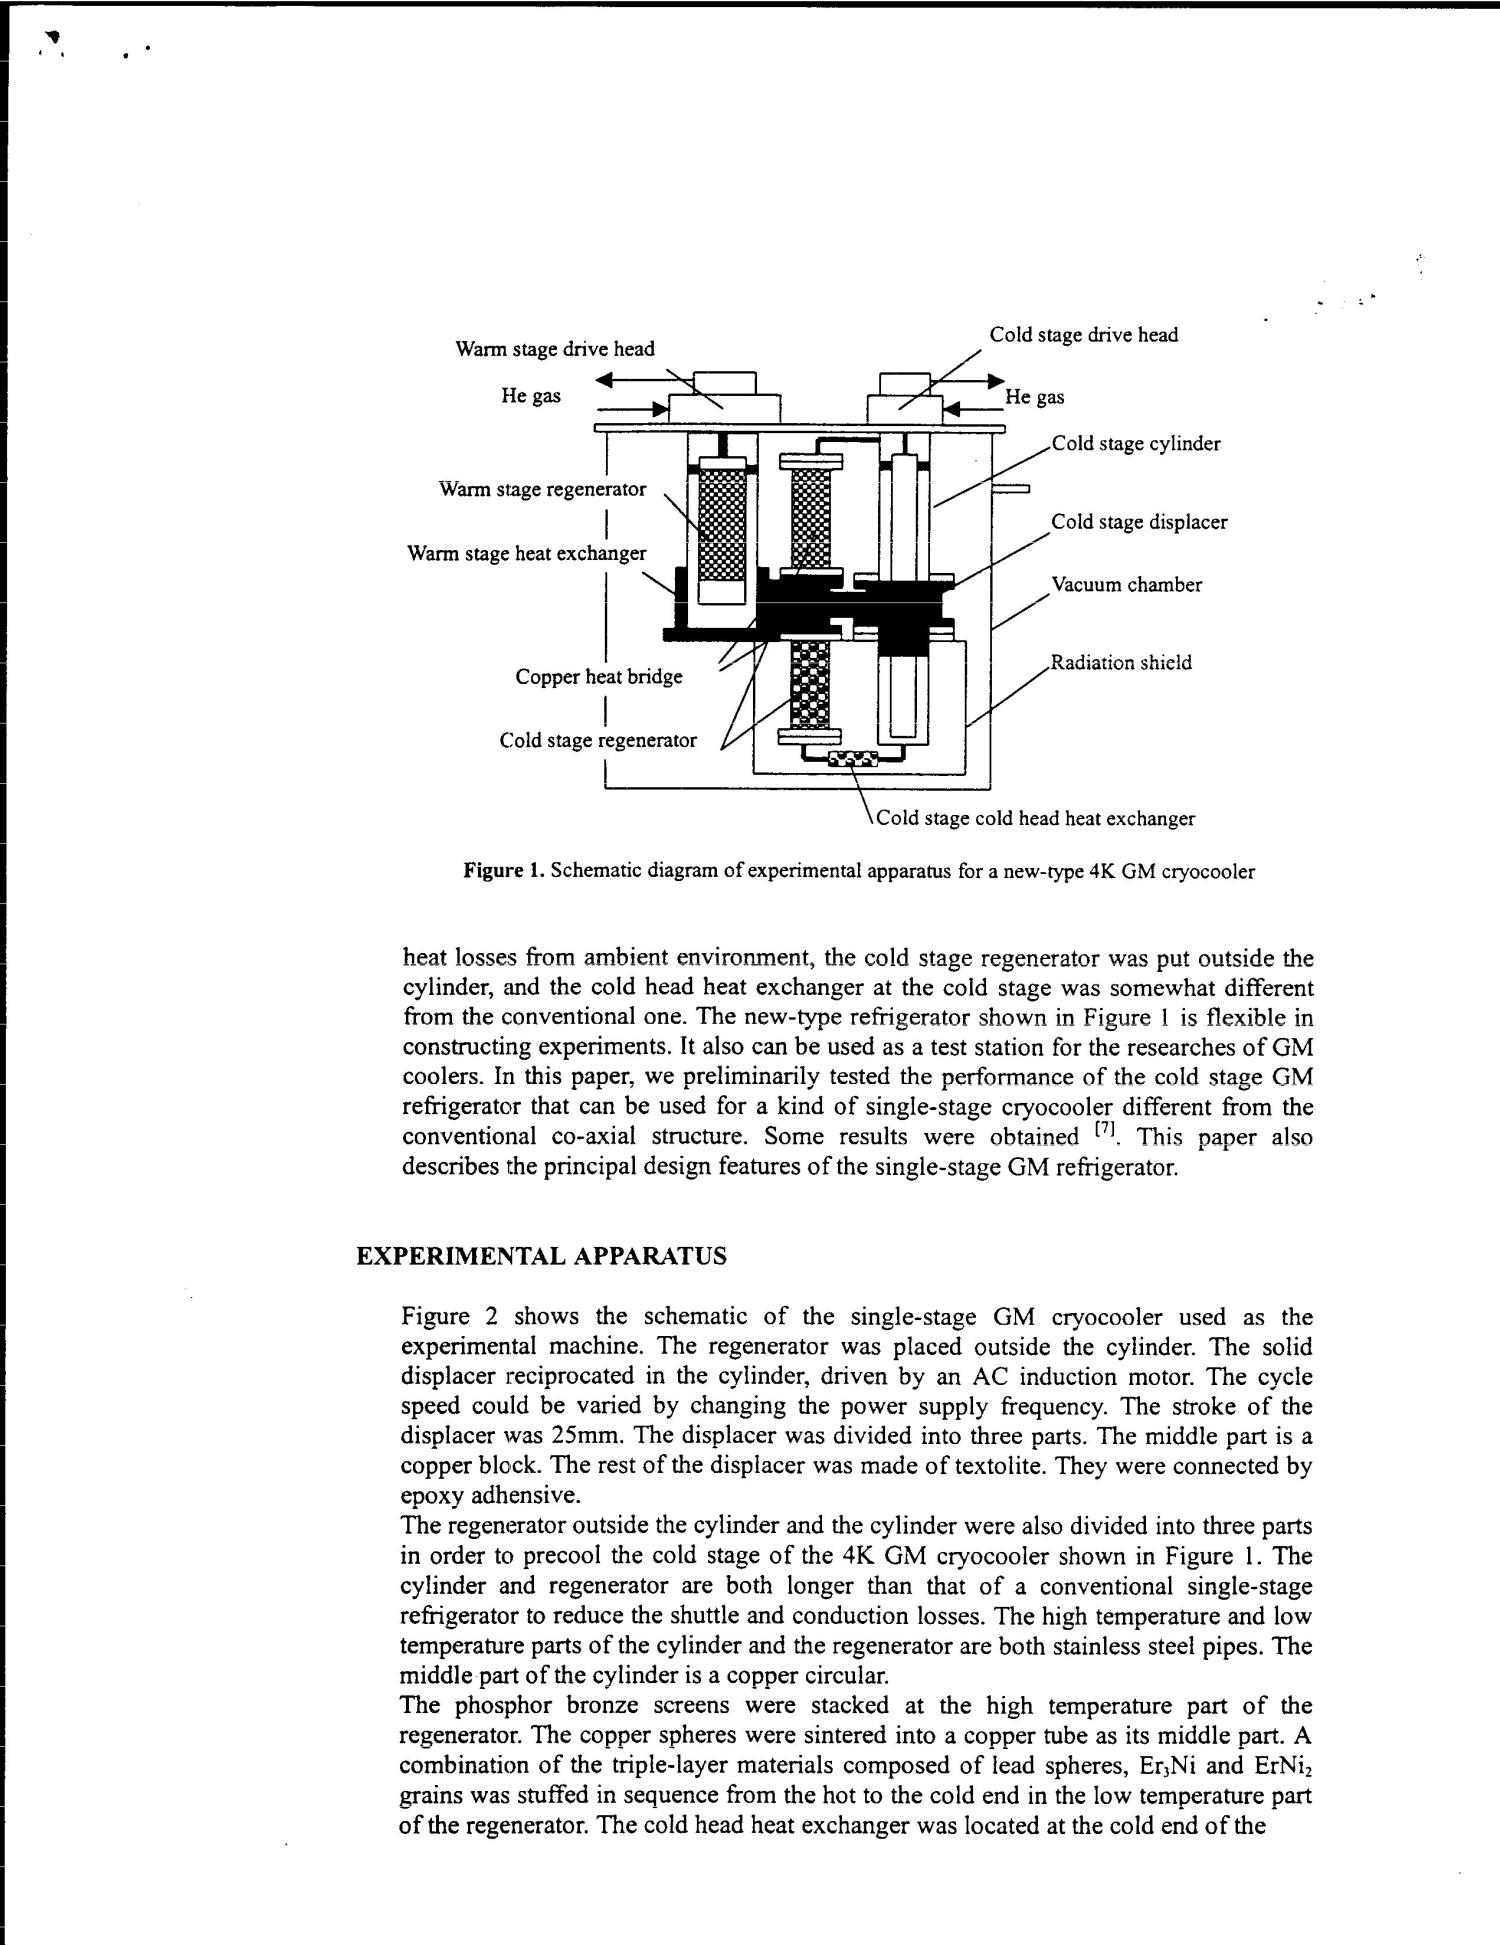 The Experimental Study of a Single Stage G-M Refrigerator With the Regenerator Set Outside the Cylinder.
                                                
                                                    [Sequence #]: 2 of 6
                                                